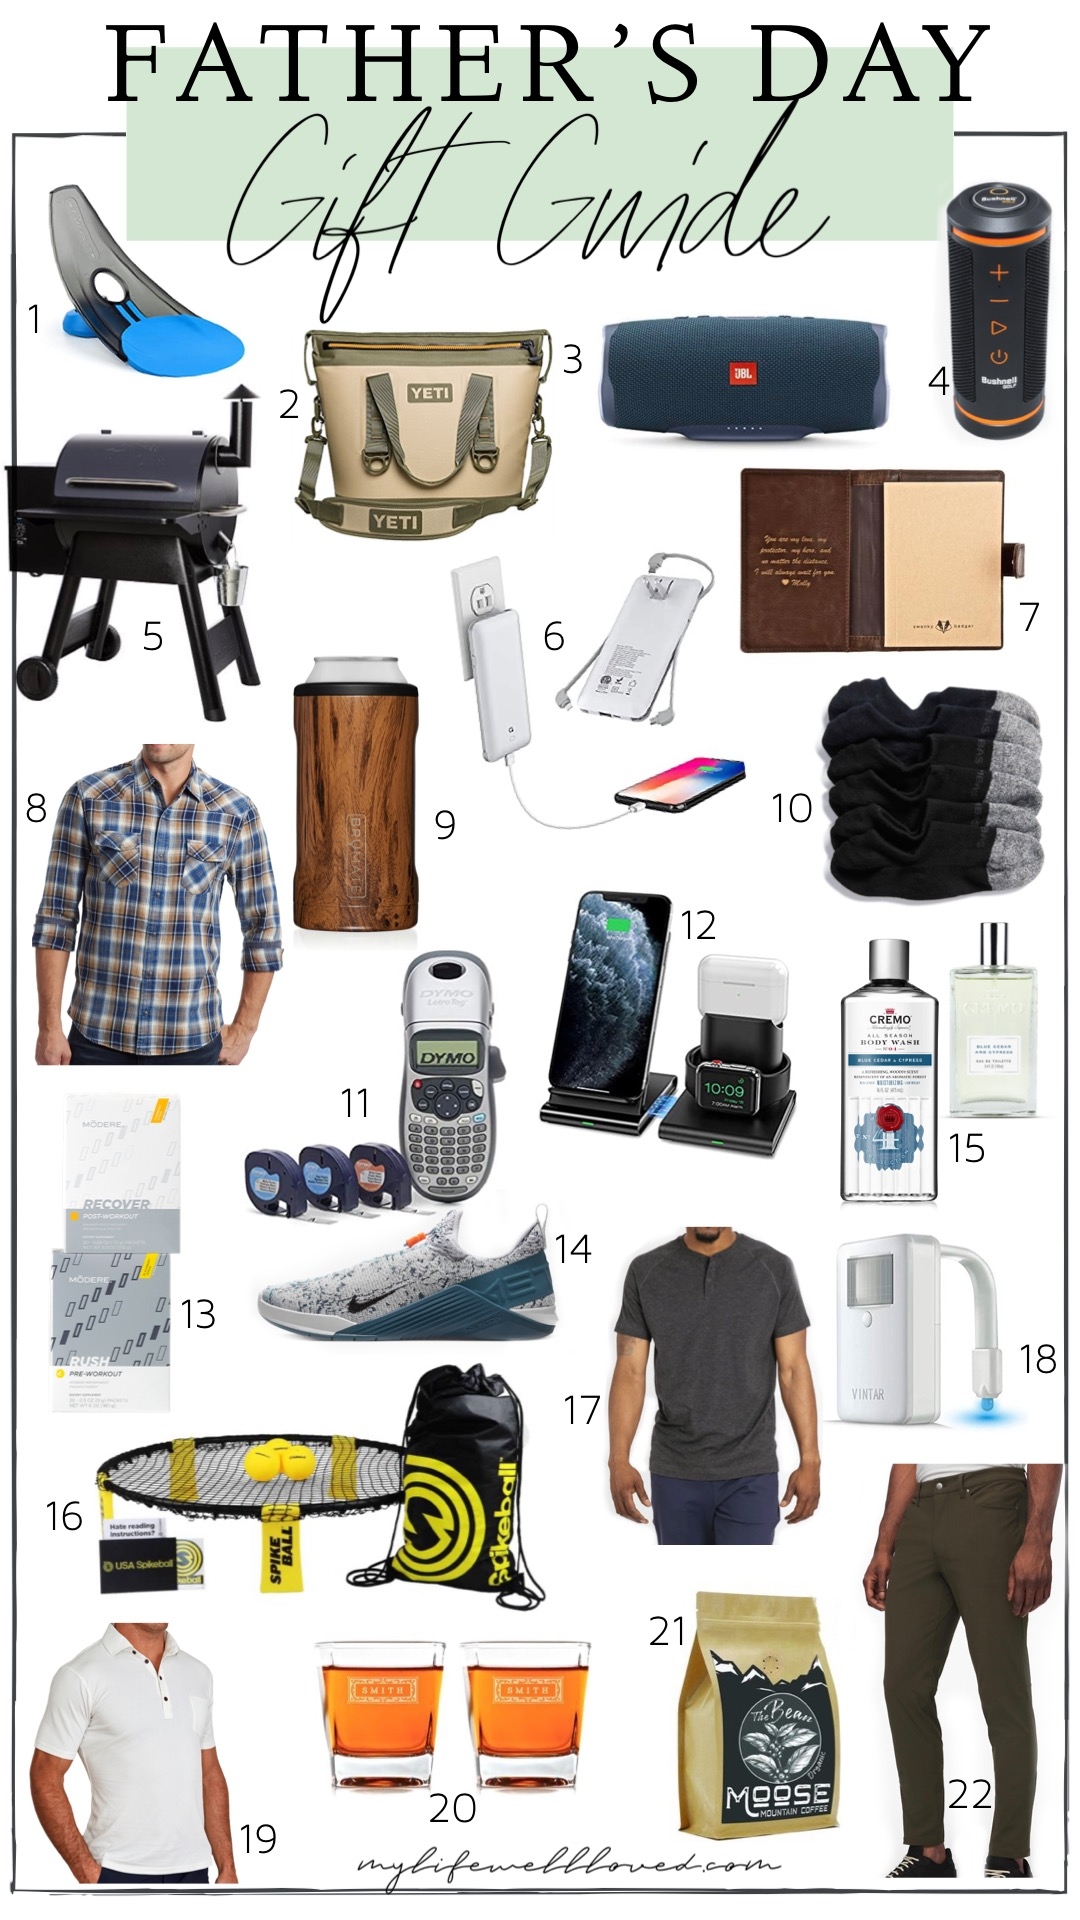 Holiday gift guide 2014: 10 gifts for dad - Today's Parent